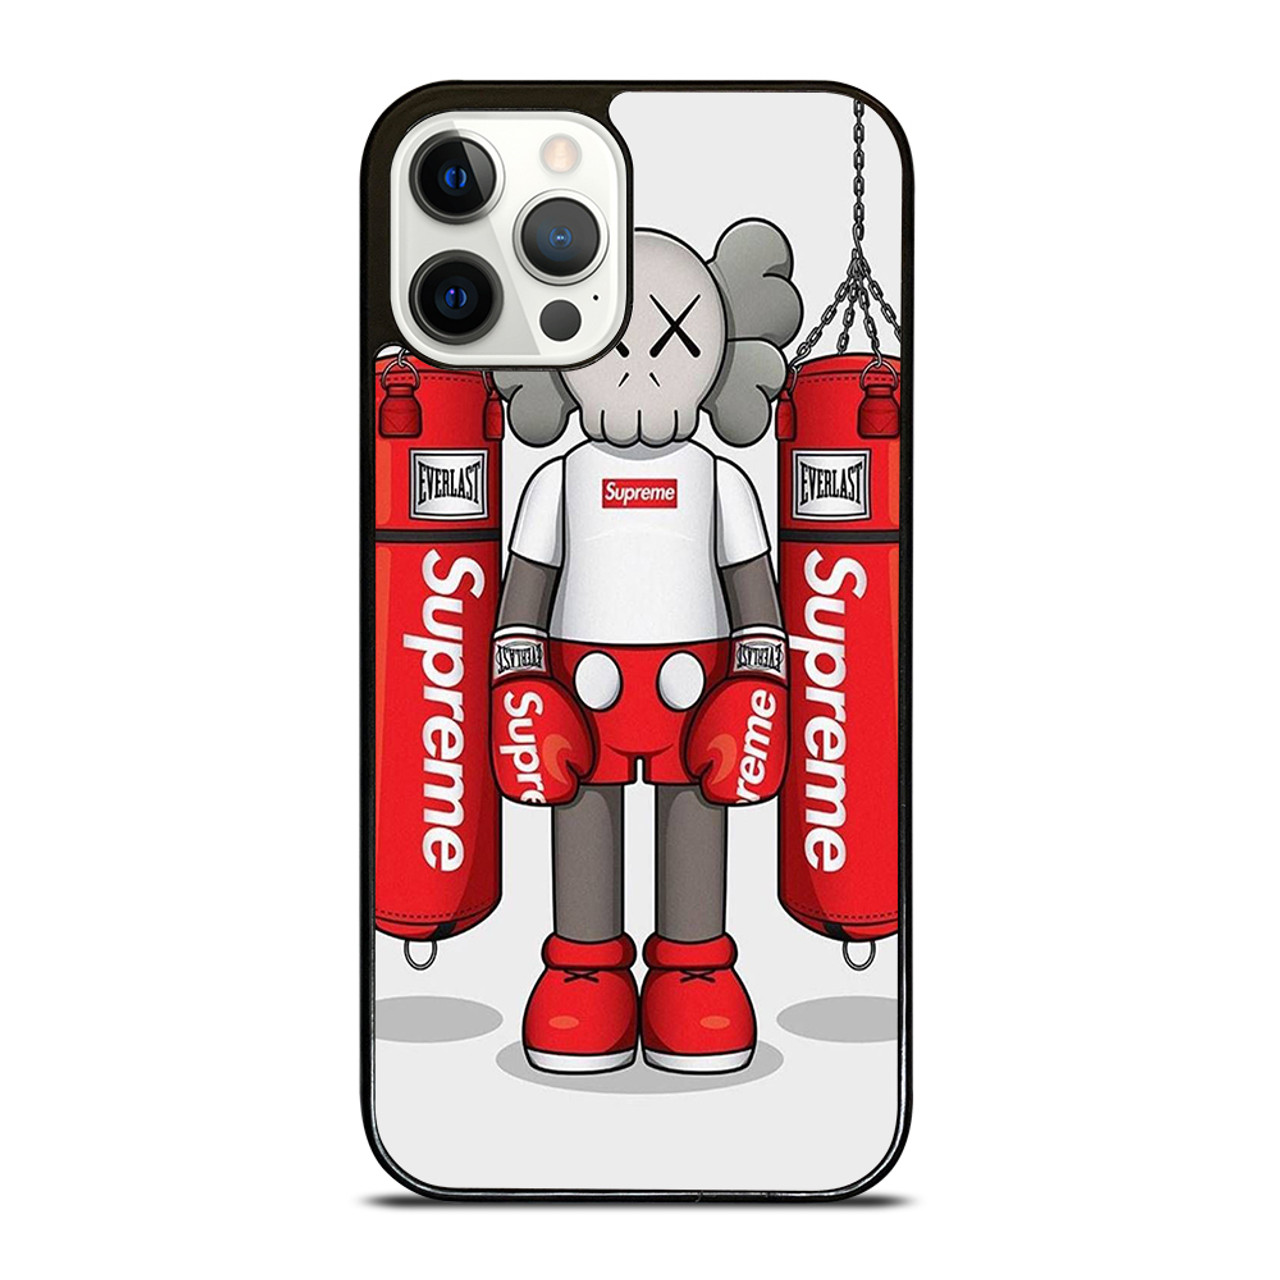 Supreme Phone Case For iPhone